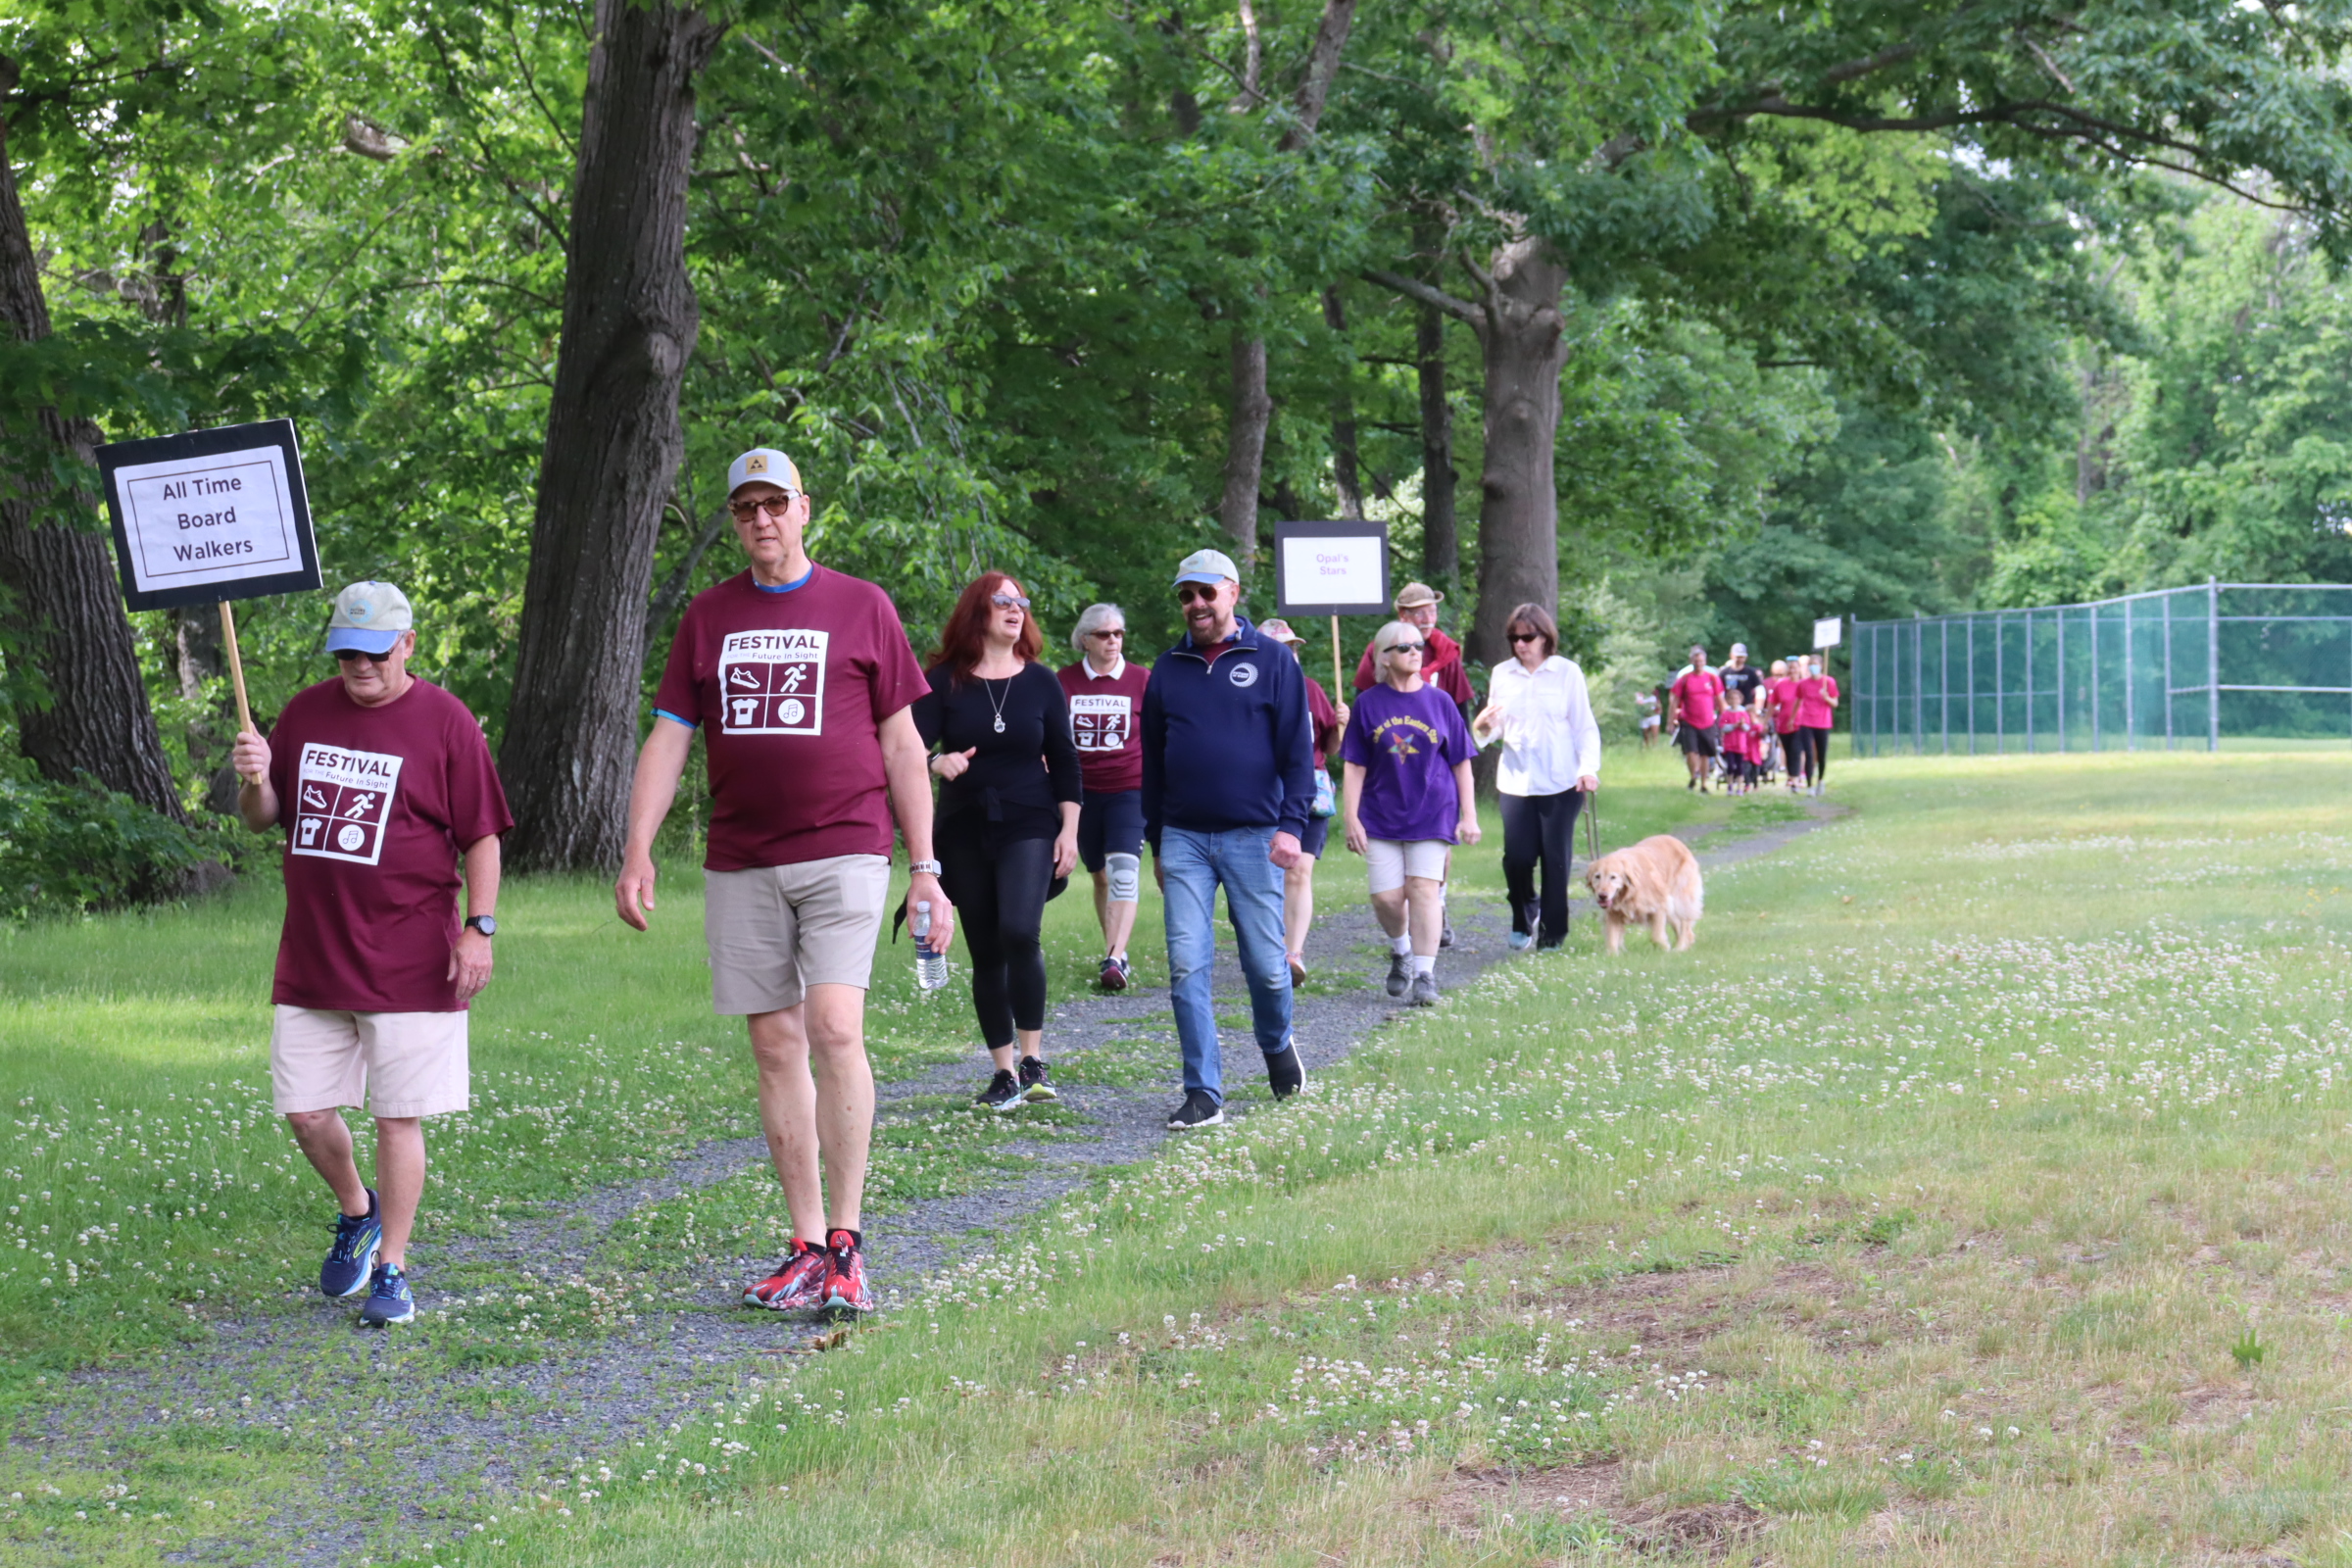 a group of walkers at the Walk for sight event